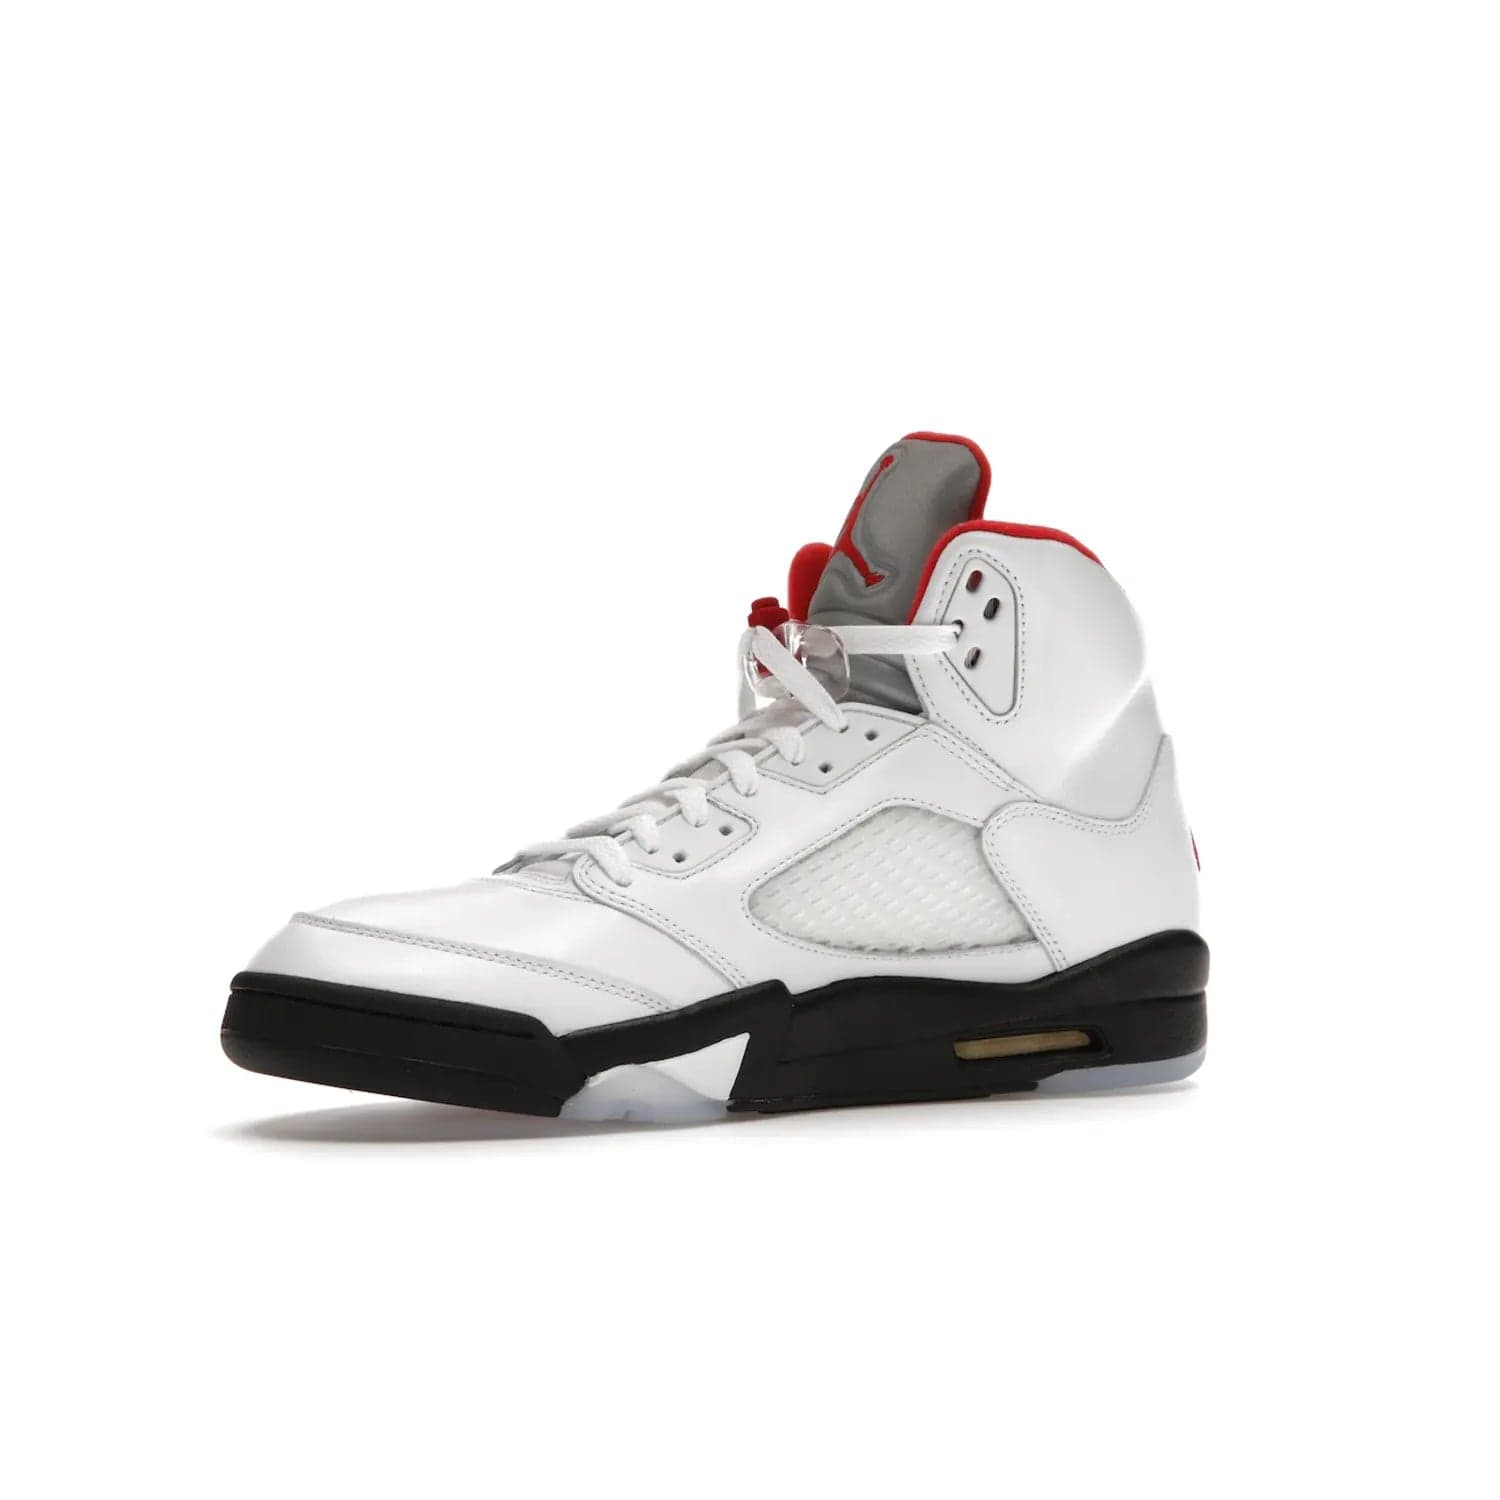 Jordan 5 Retro Fire Red Silver Tongue (2020) - Image 16 - Only at www.BallersClubKickz.com - Experience classic styling with the Jordan 5 Retro Fire Red Silver Tongue (2020). Features a white leather upper, 3M reflective tongue, midsole colorblocking, and an icy translucent outsole. Now available, upgrade your shoe collection today.